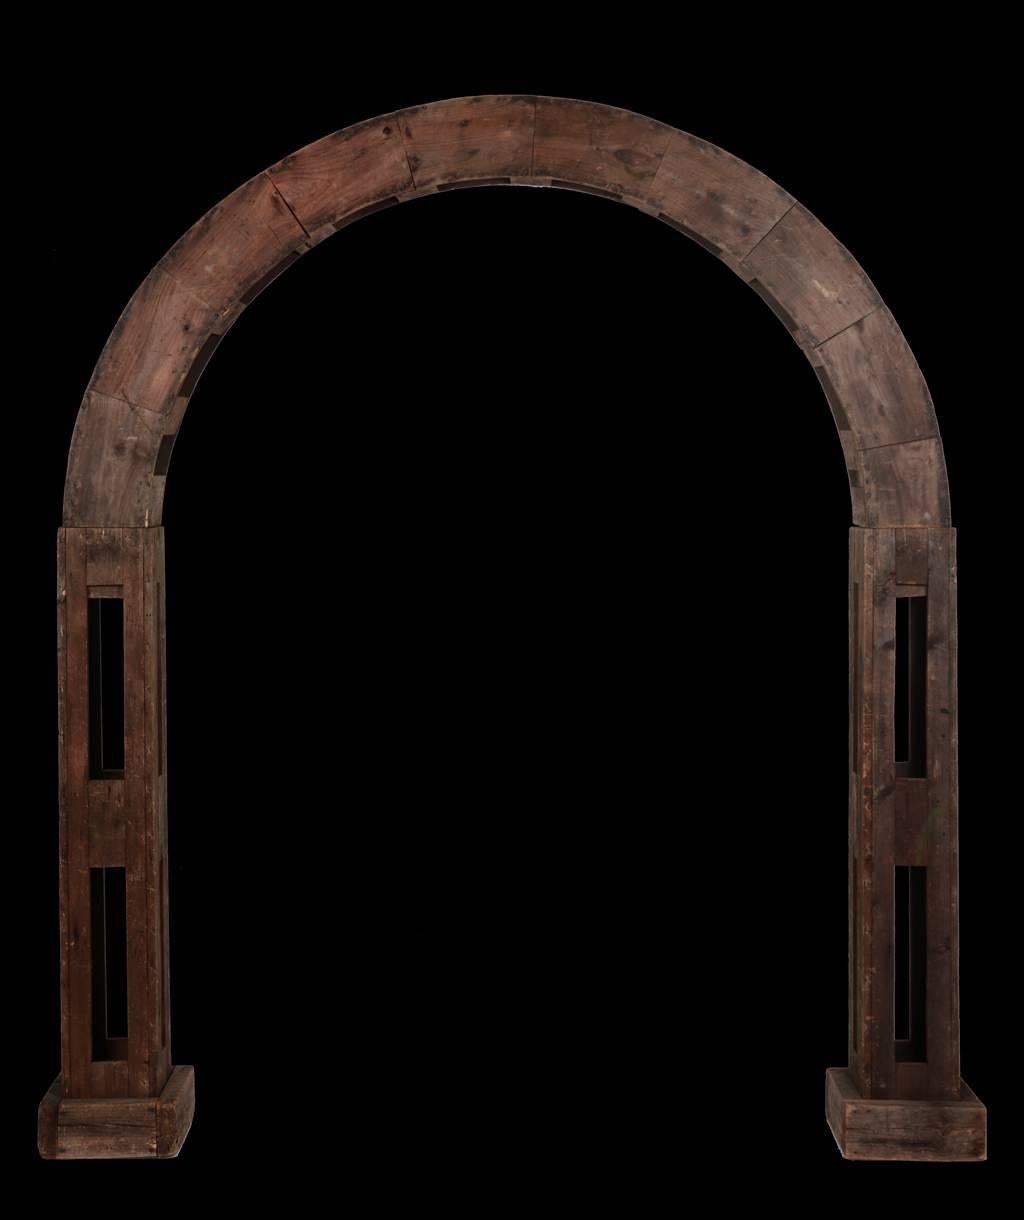 Uniquely designed wooden three section portable arch. Originally designed as a climbing vessel for seasonal vegetables.